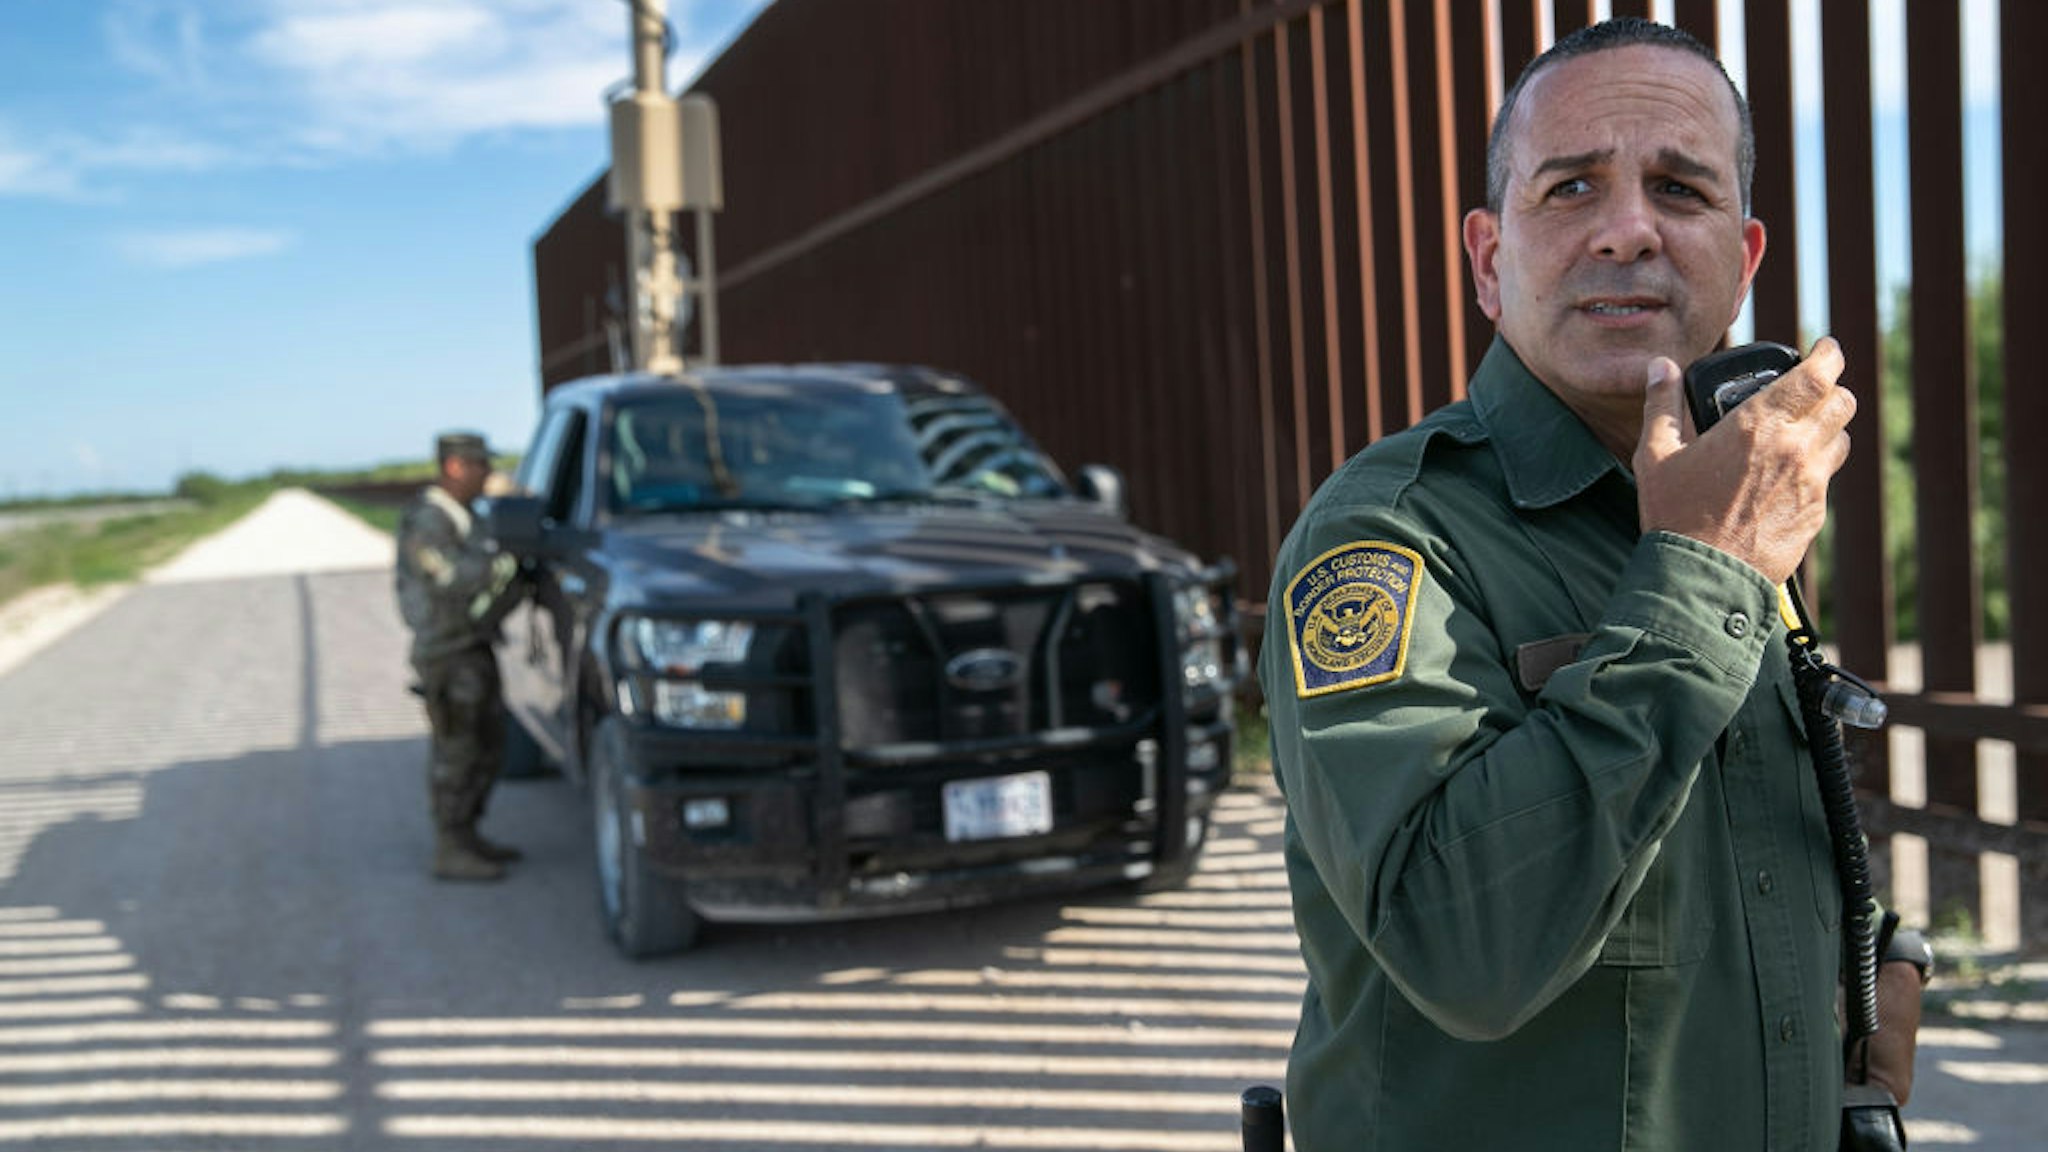 U.S. Border Patrol agent Carlos Ruiz spots a pair of undocumented immigrants while coordinating with active duty U.S. Army soldiers near the U.S.-Mexico border fence on September 10, 2019 in Penitas, Texas.